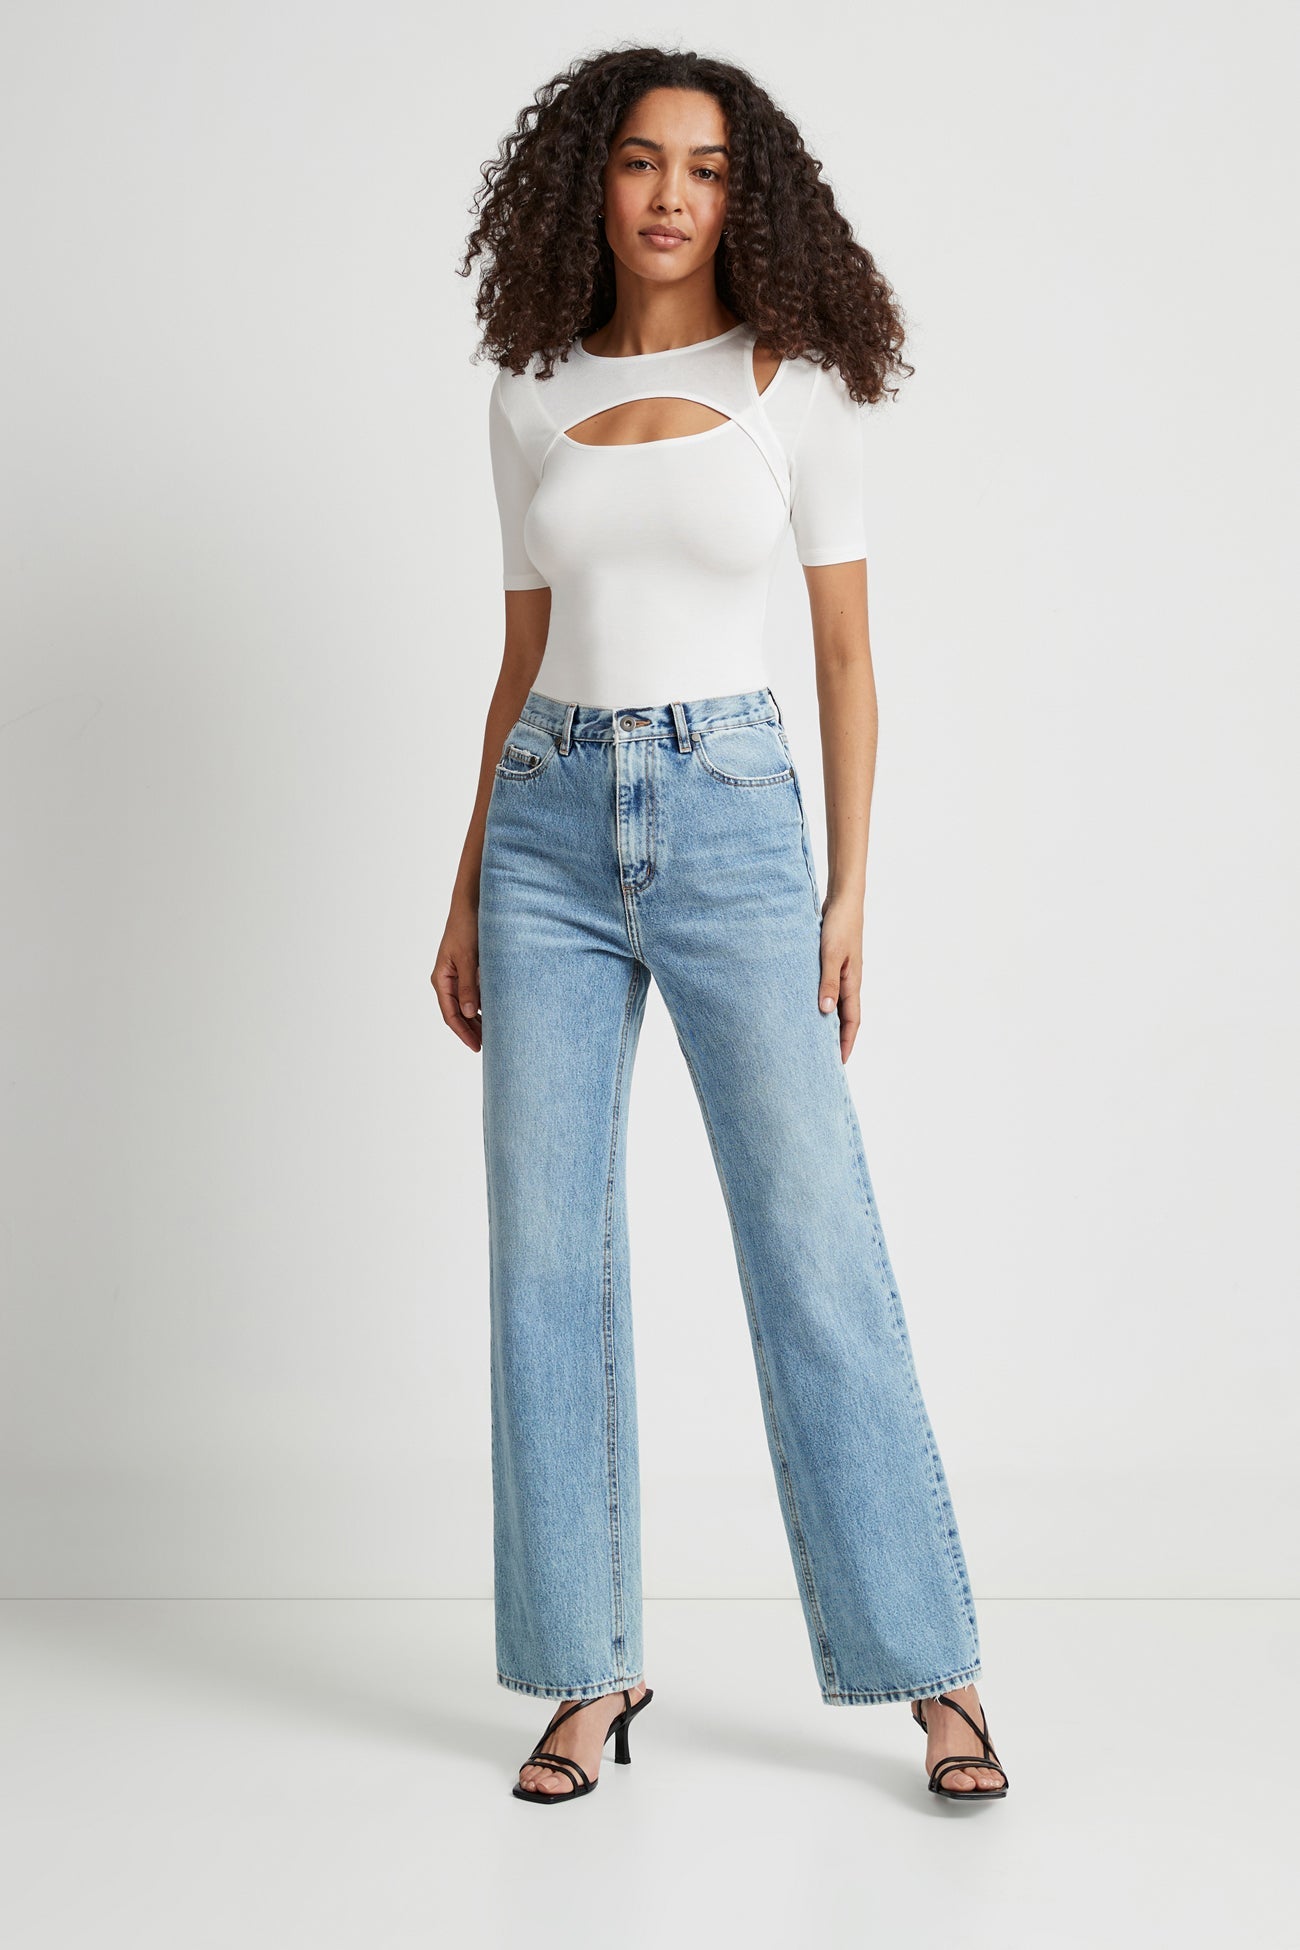 Off White Cut Out Top - Bowen Sleeveless Top | Marcella